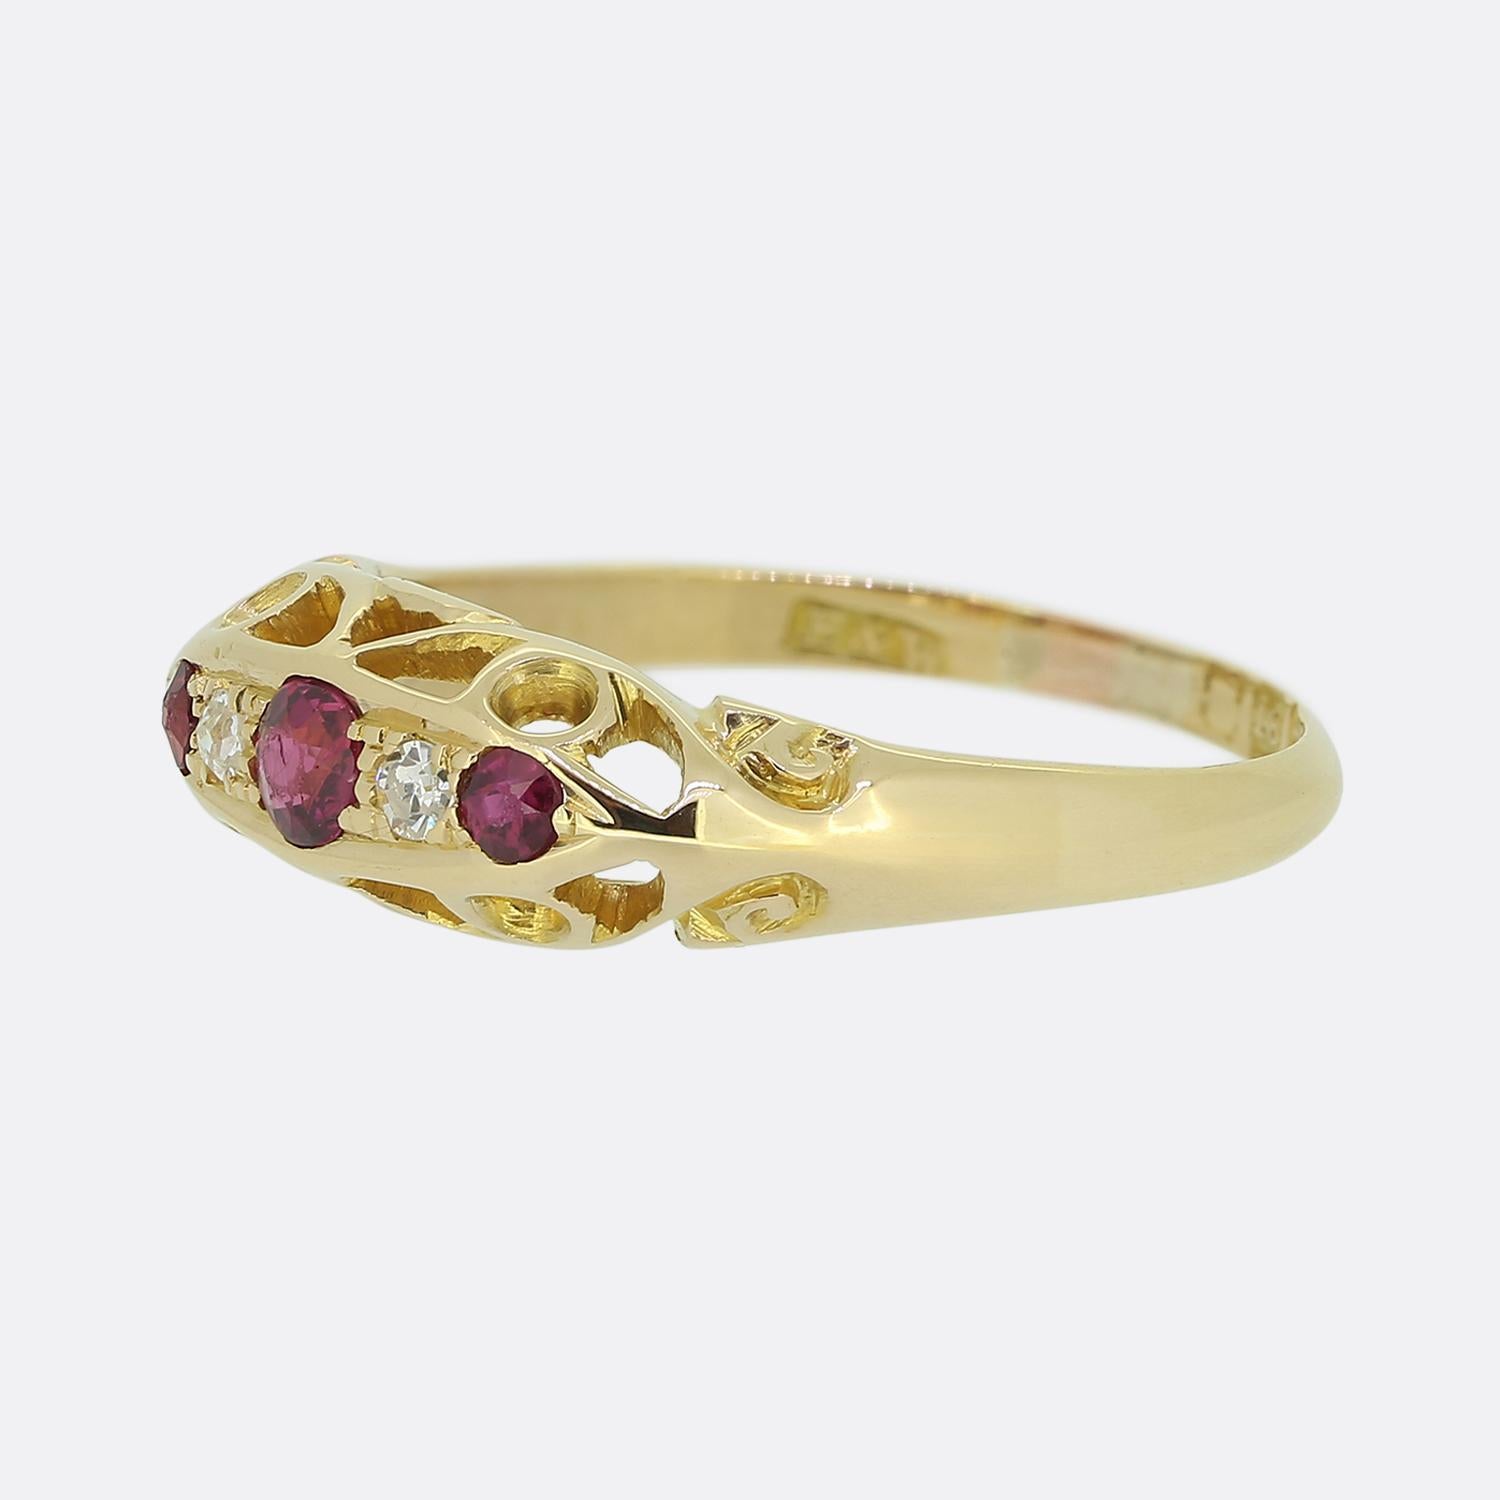 Here we have a delightful ruby and diamond ring dating back to the Edwardian period. This antique piece has been crafted from 18ct yellow gold and showcases a trio of perfectly matched red rubies. Each of these vivid stones has been individually